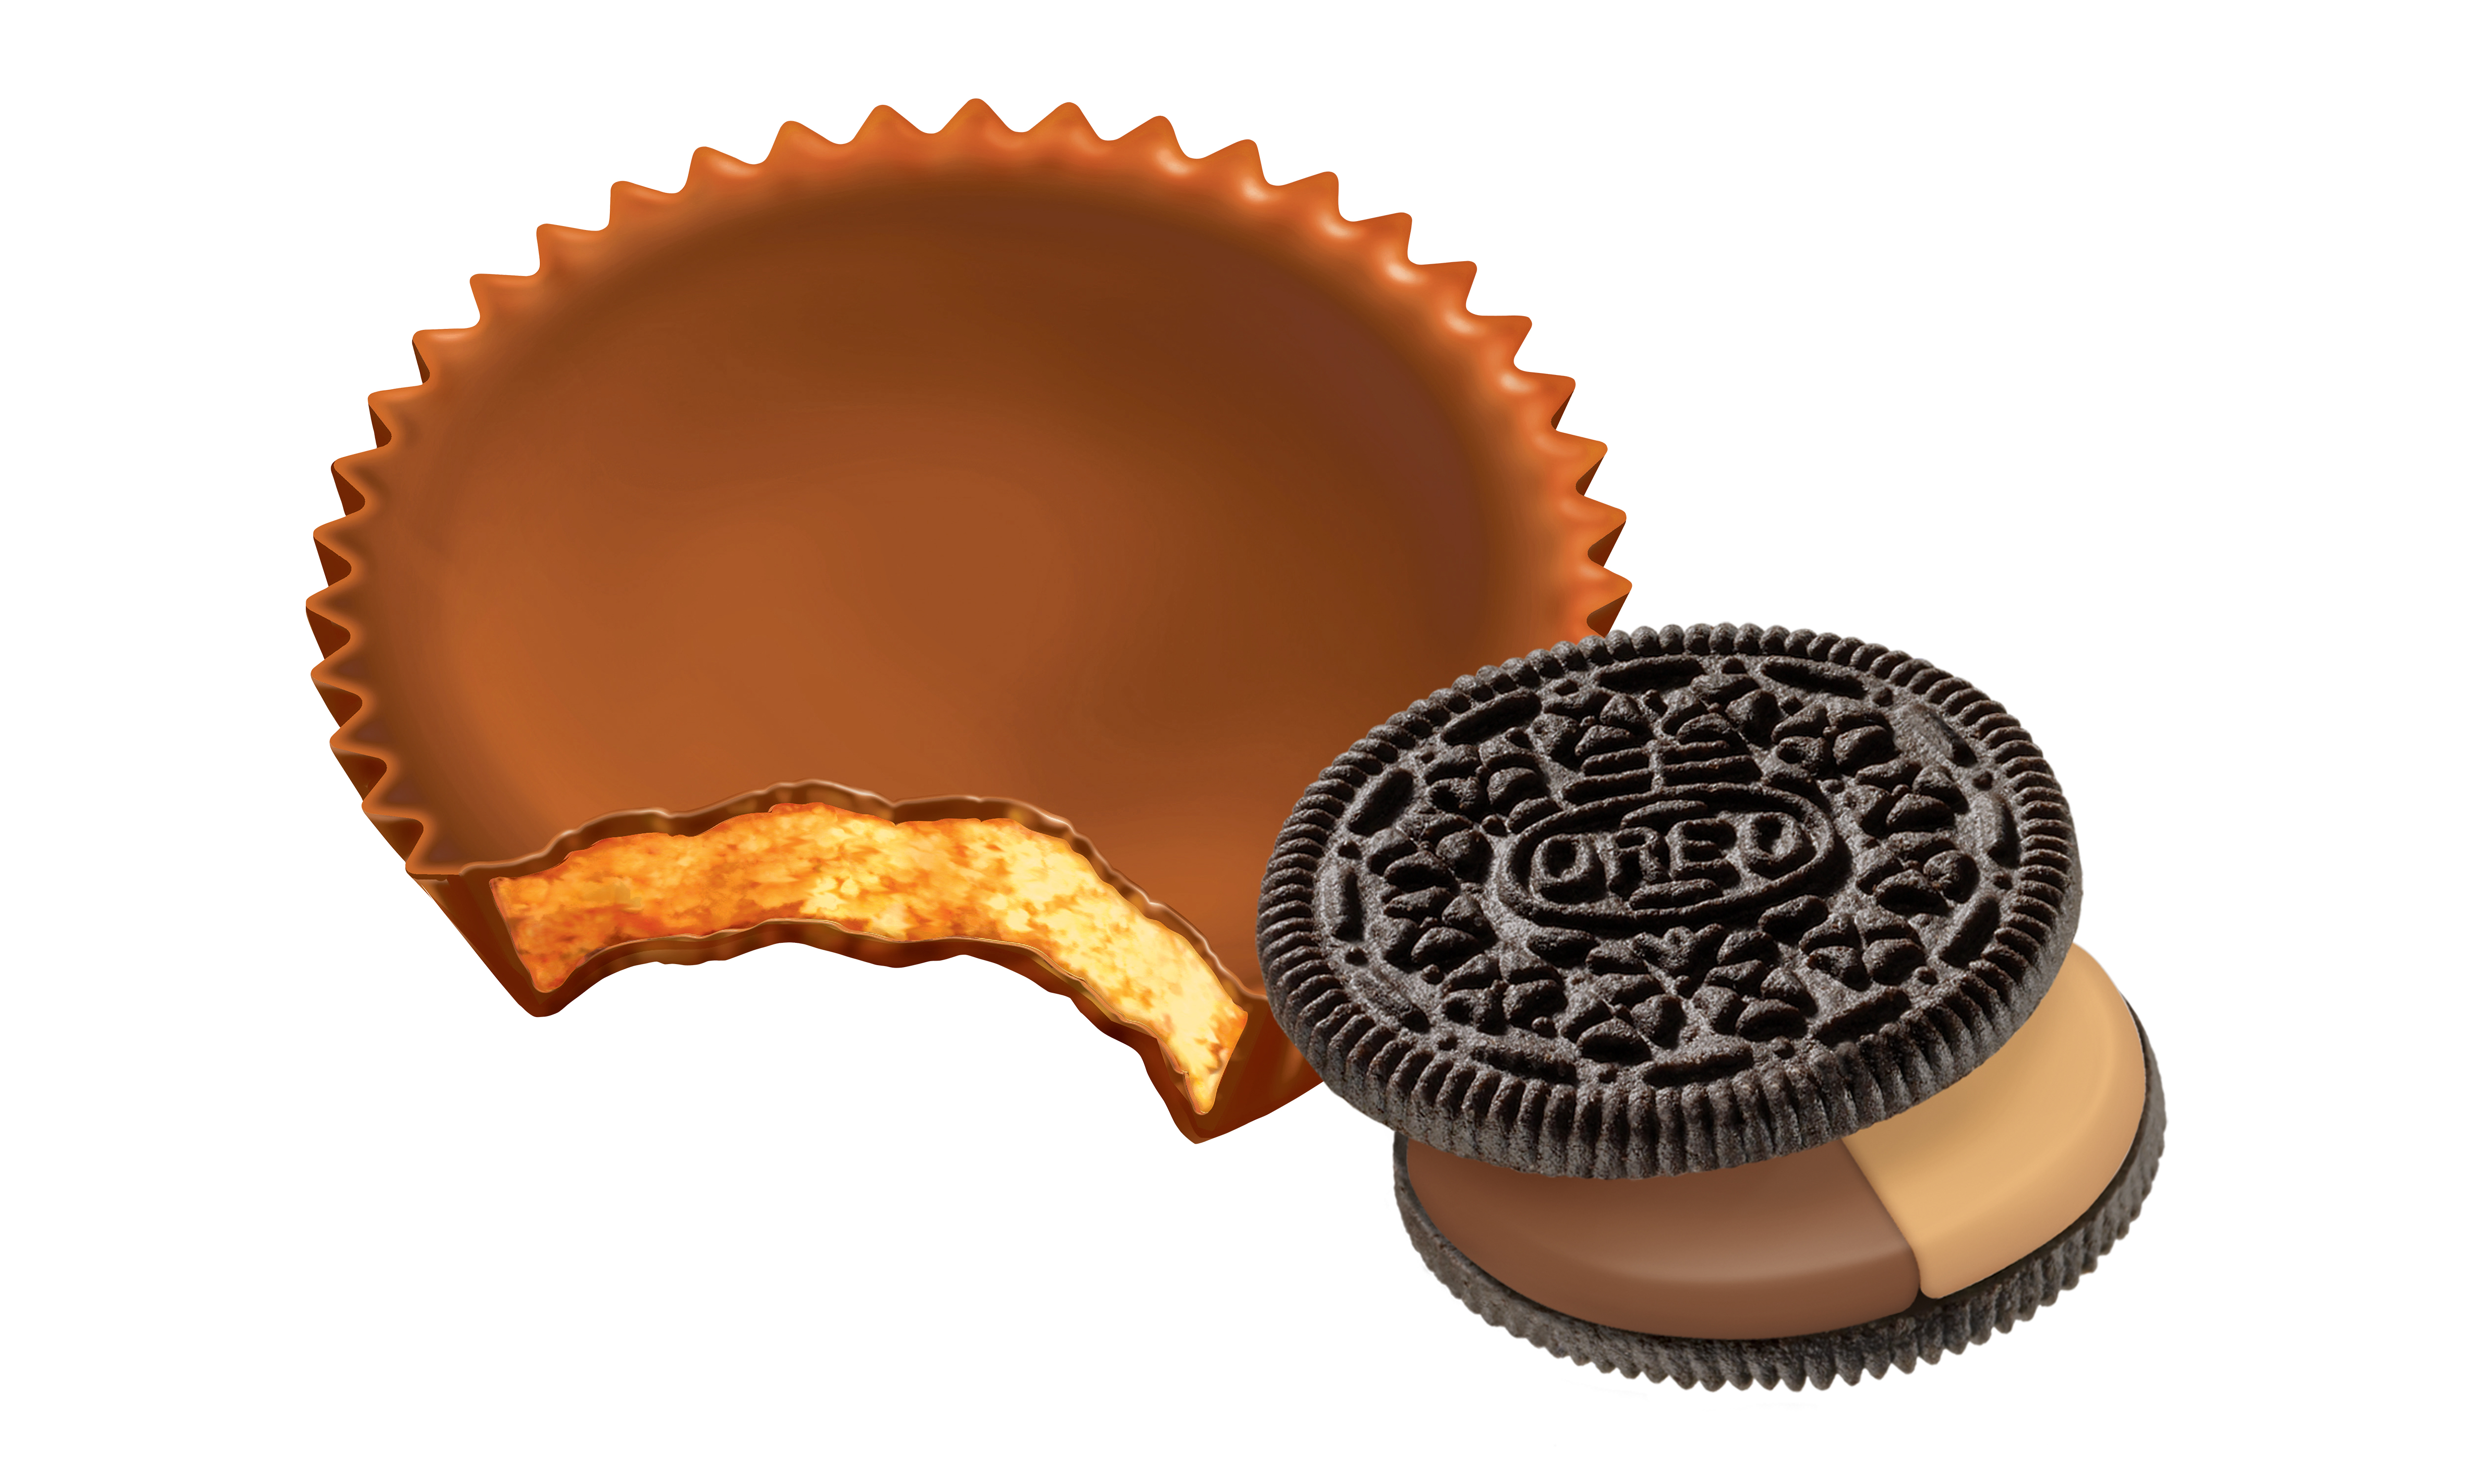 Nabisco Reese's Oreo Peanut Butter Cup Creme Chocolate Sandwich Cookies, 12.2 Oz. - image 2 of 6